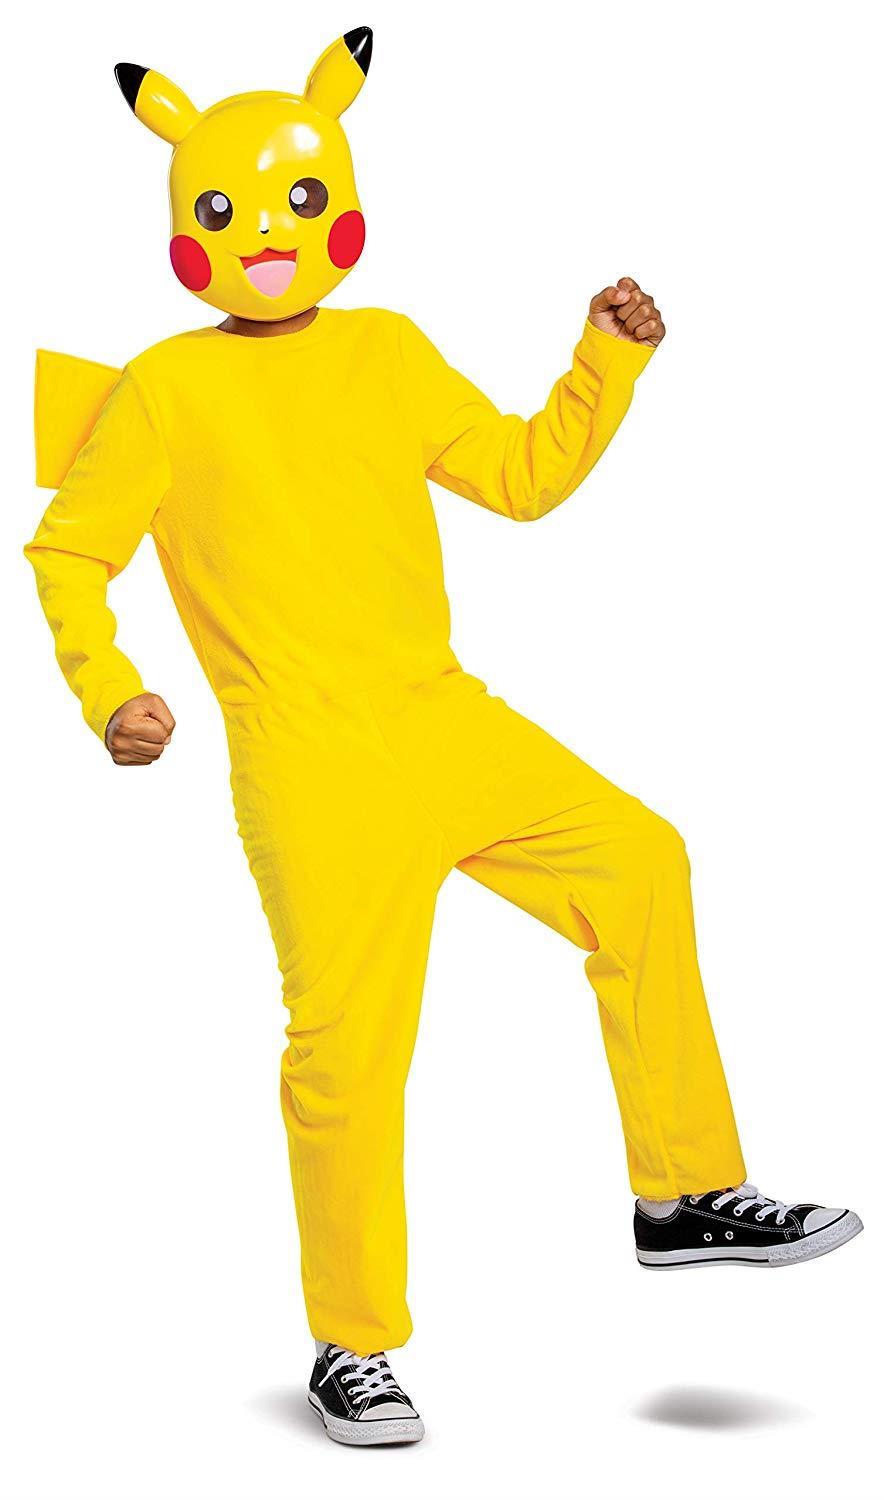 Pikachu Pokemon Classic Size XL 14/16 Kids Licensed Costume Disguise